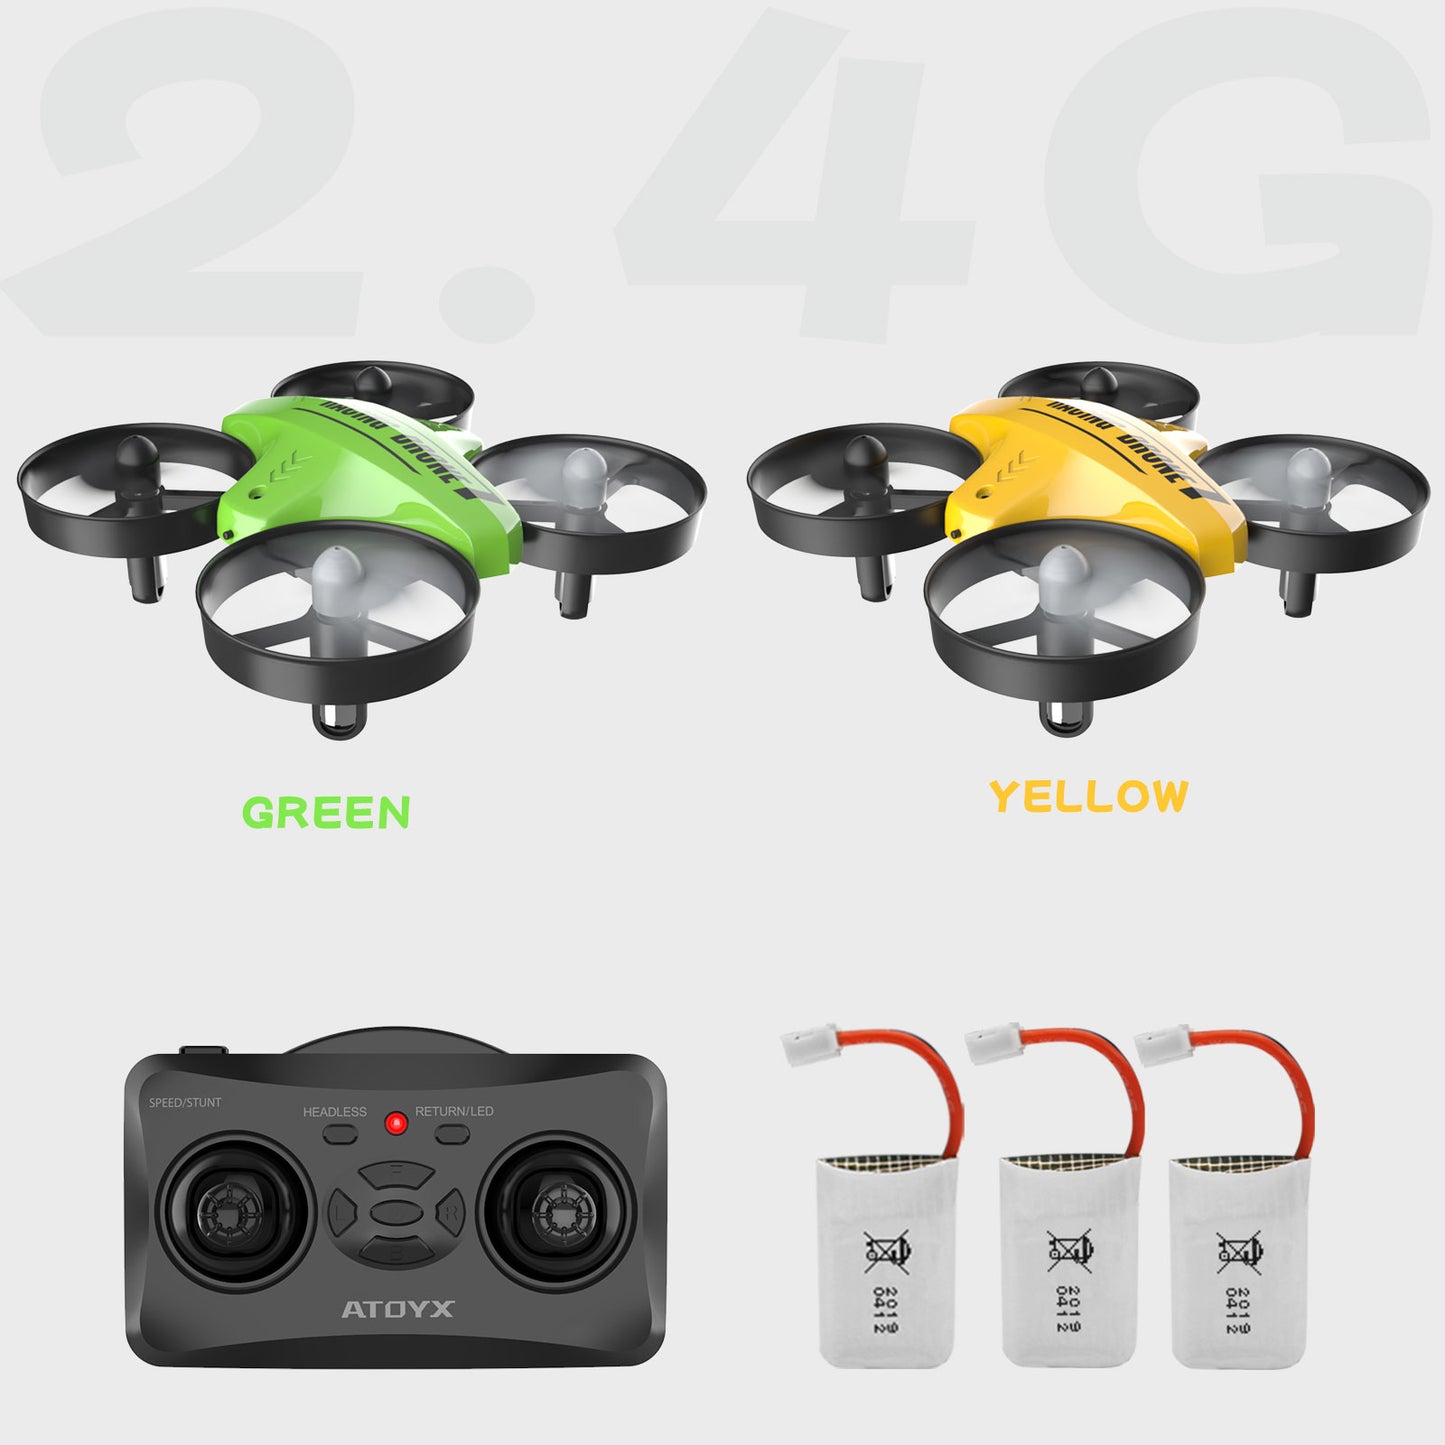 Children's mini drone toy for beginners